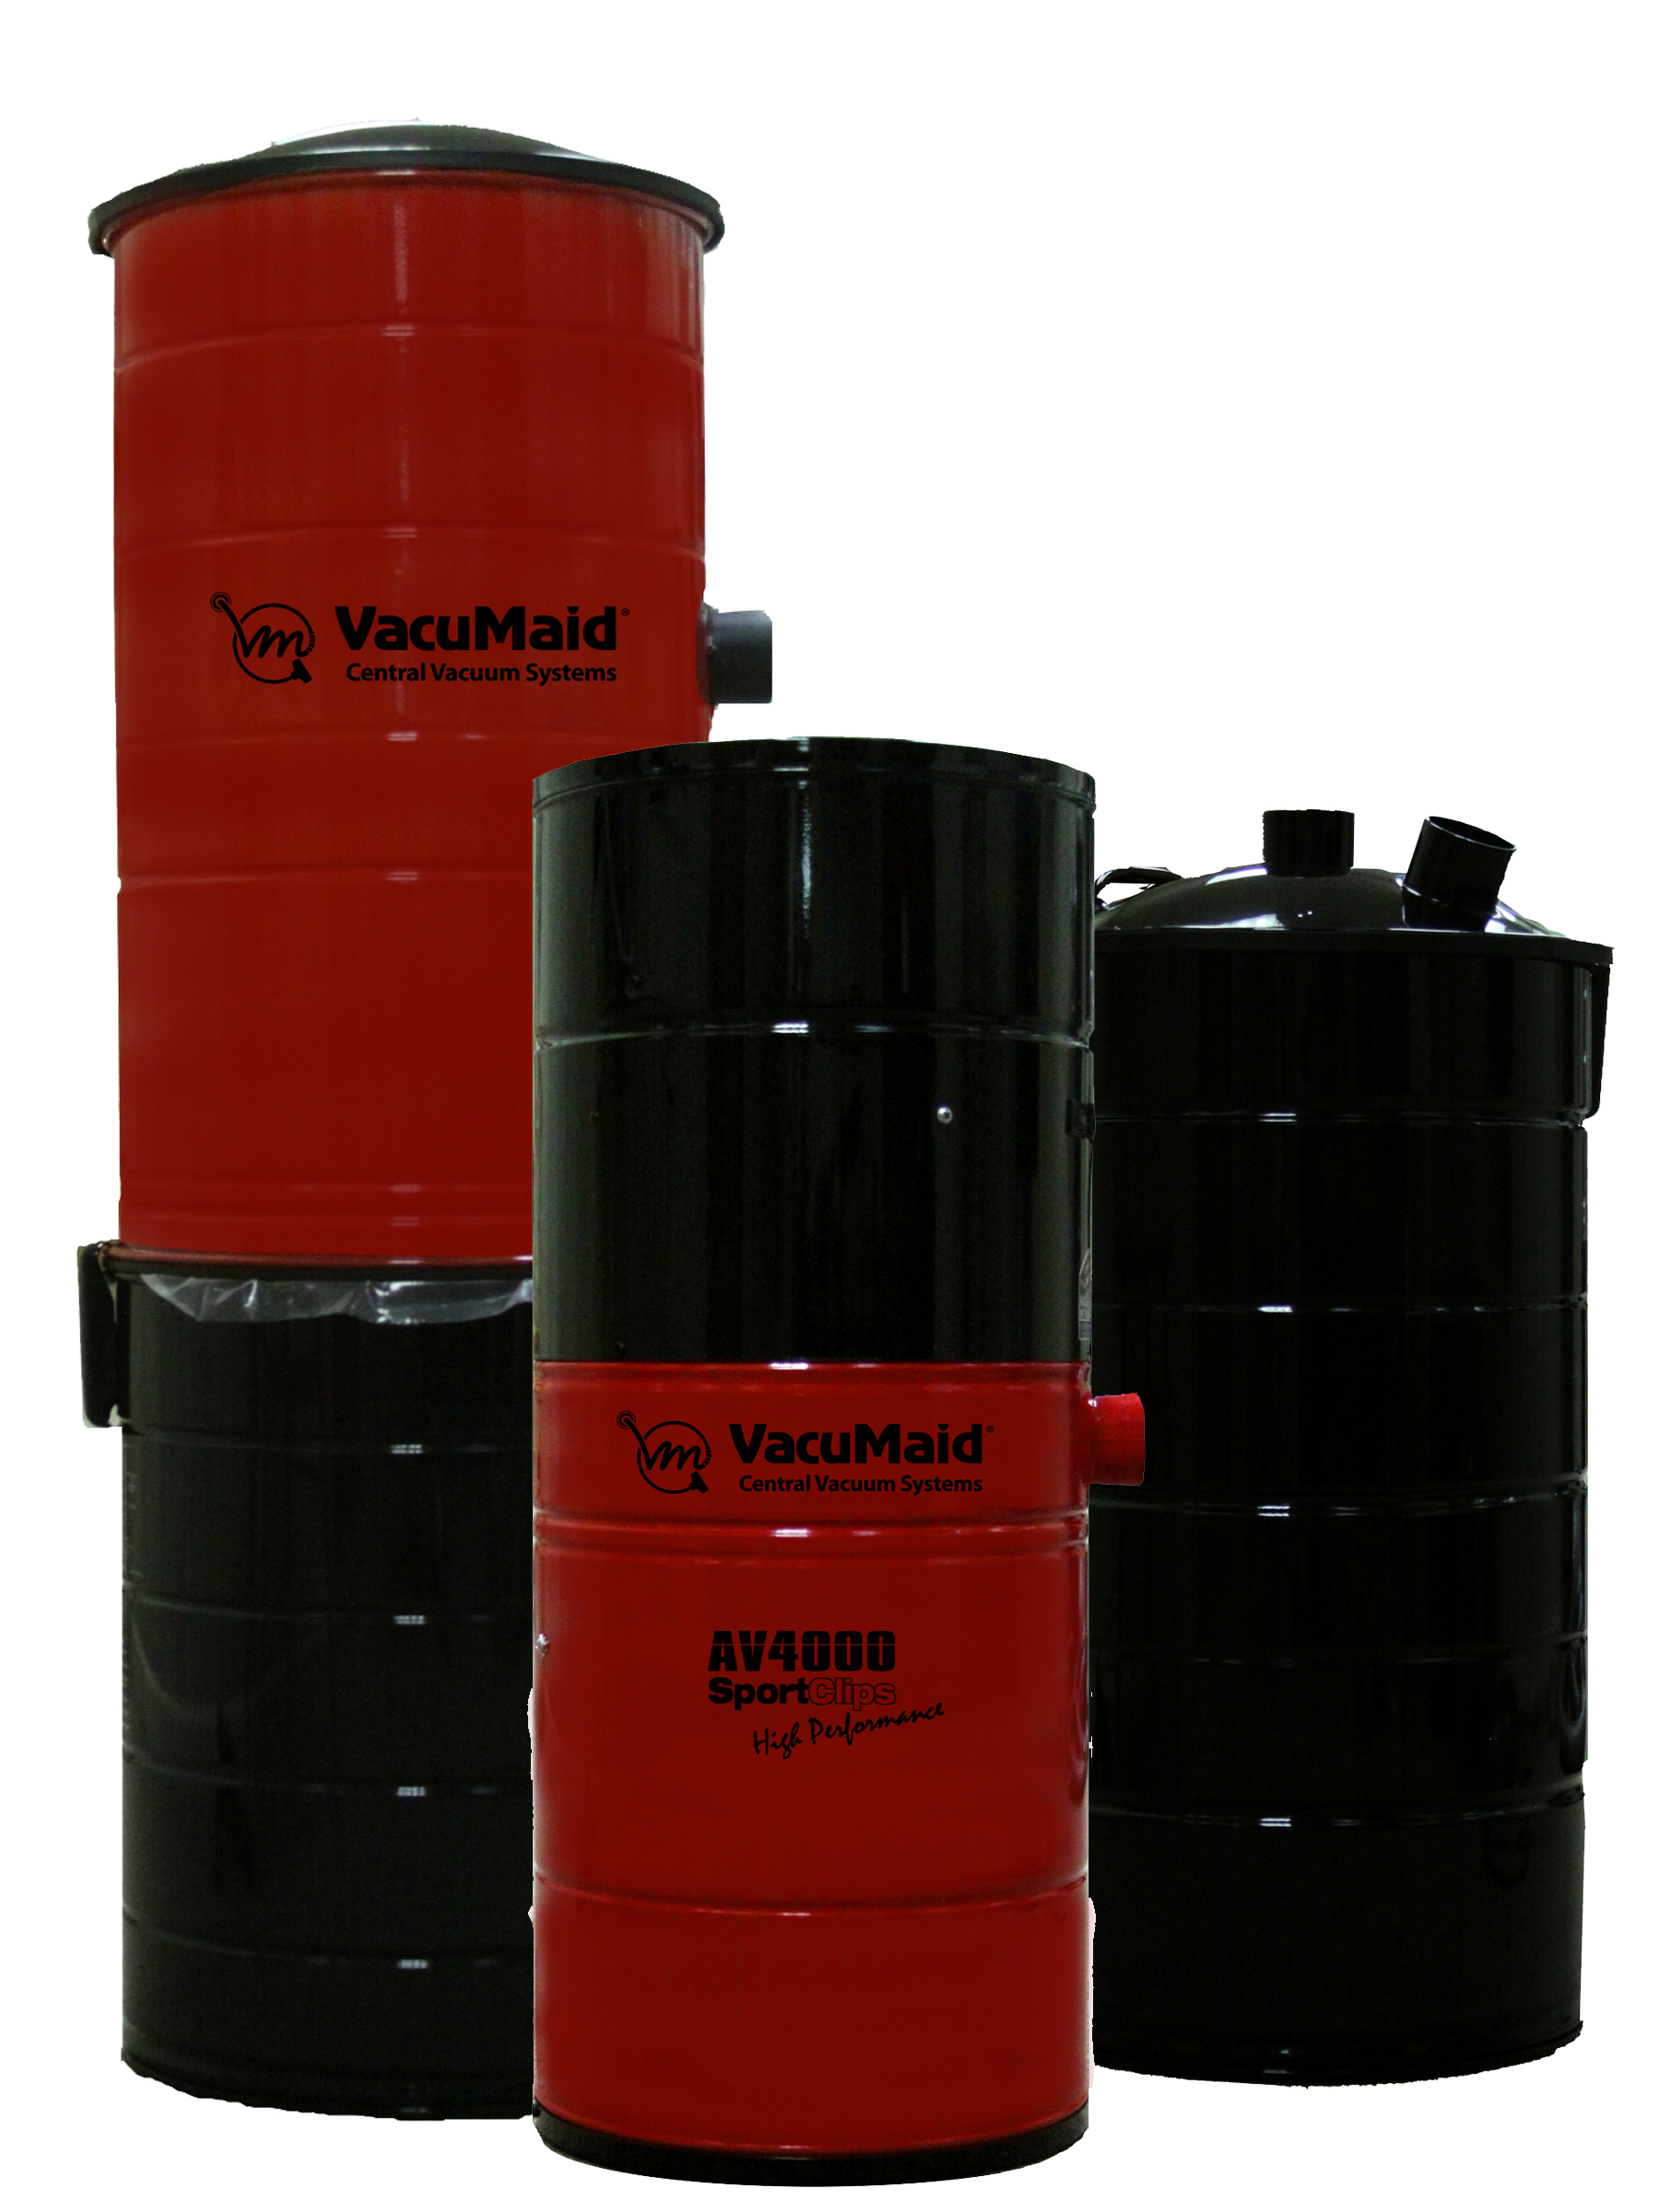 VacuMaid Disposable Bag – Manufacturer of VacuMaid Central Vacuum Systems